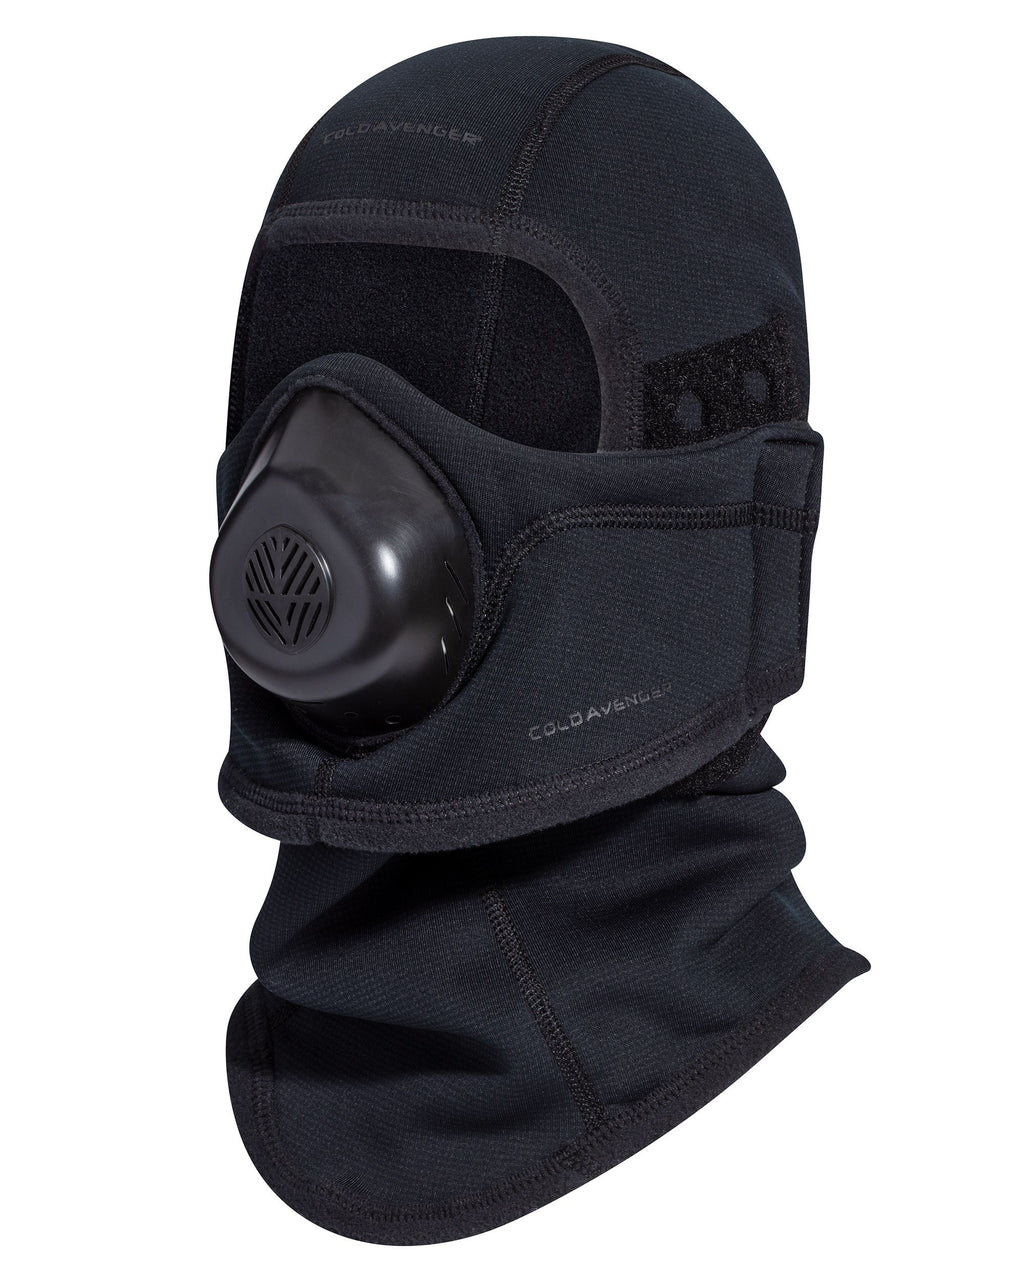 Detachable multi-functional protective hood. The picture was drawn by